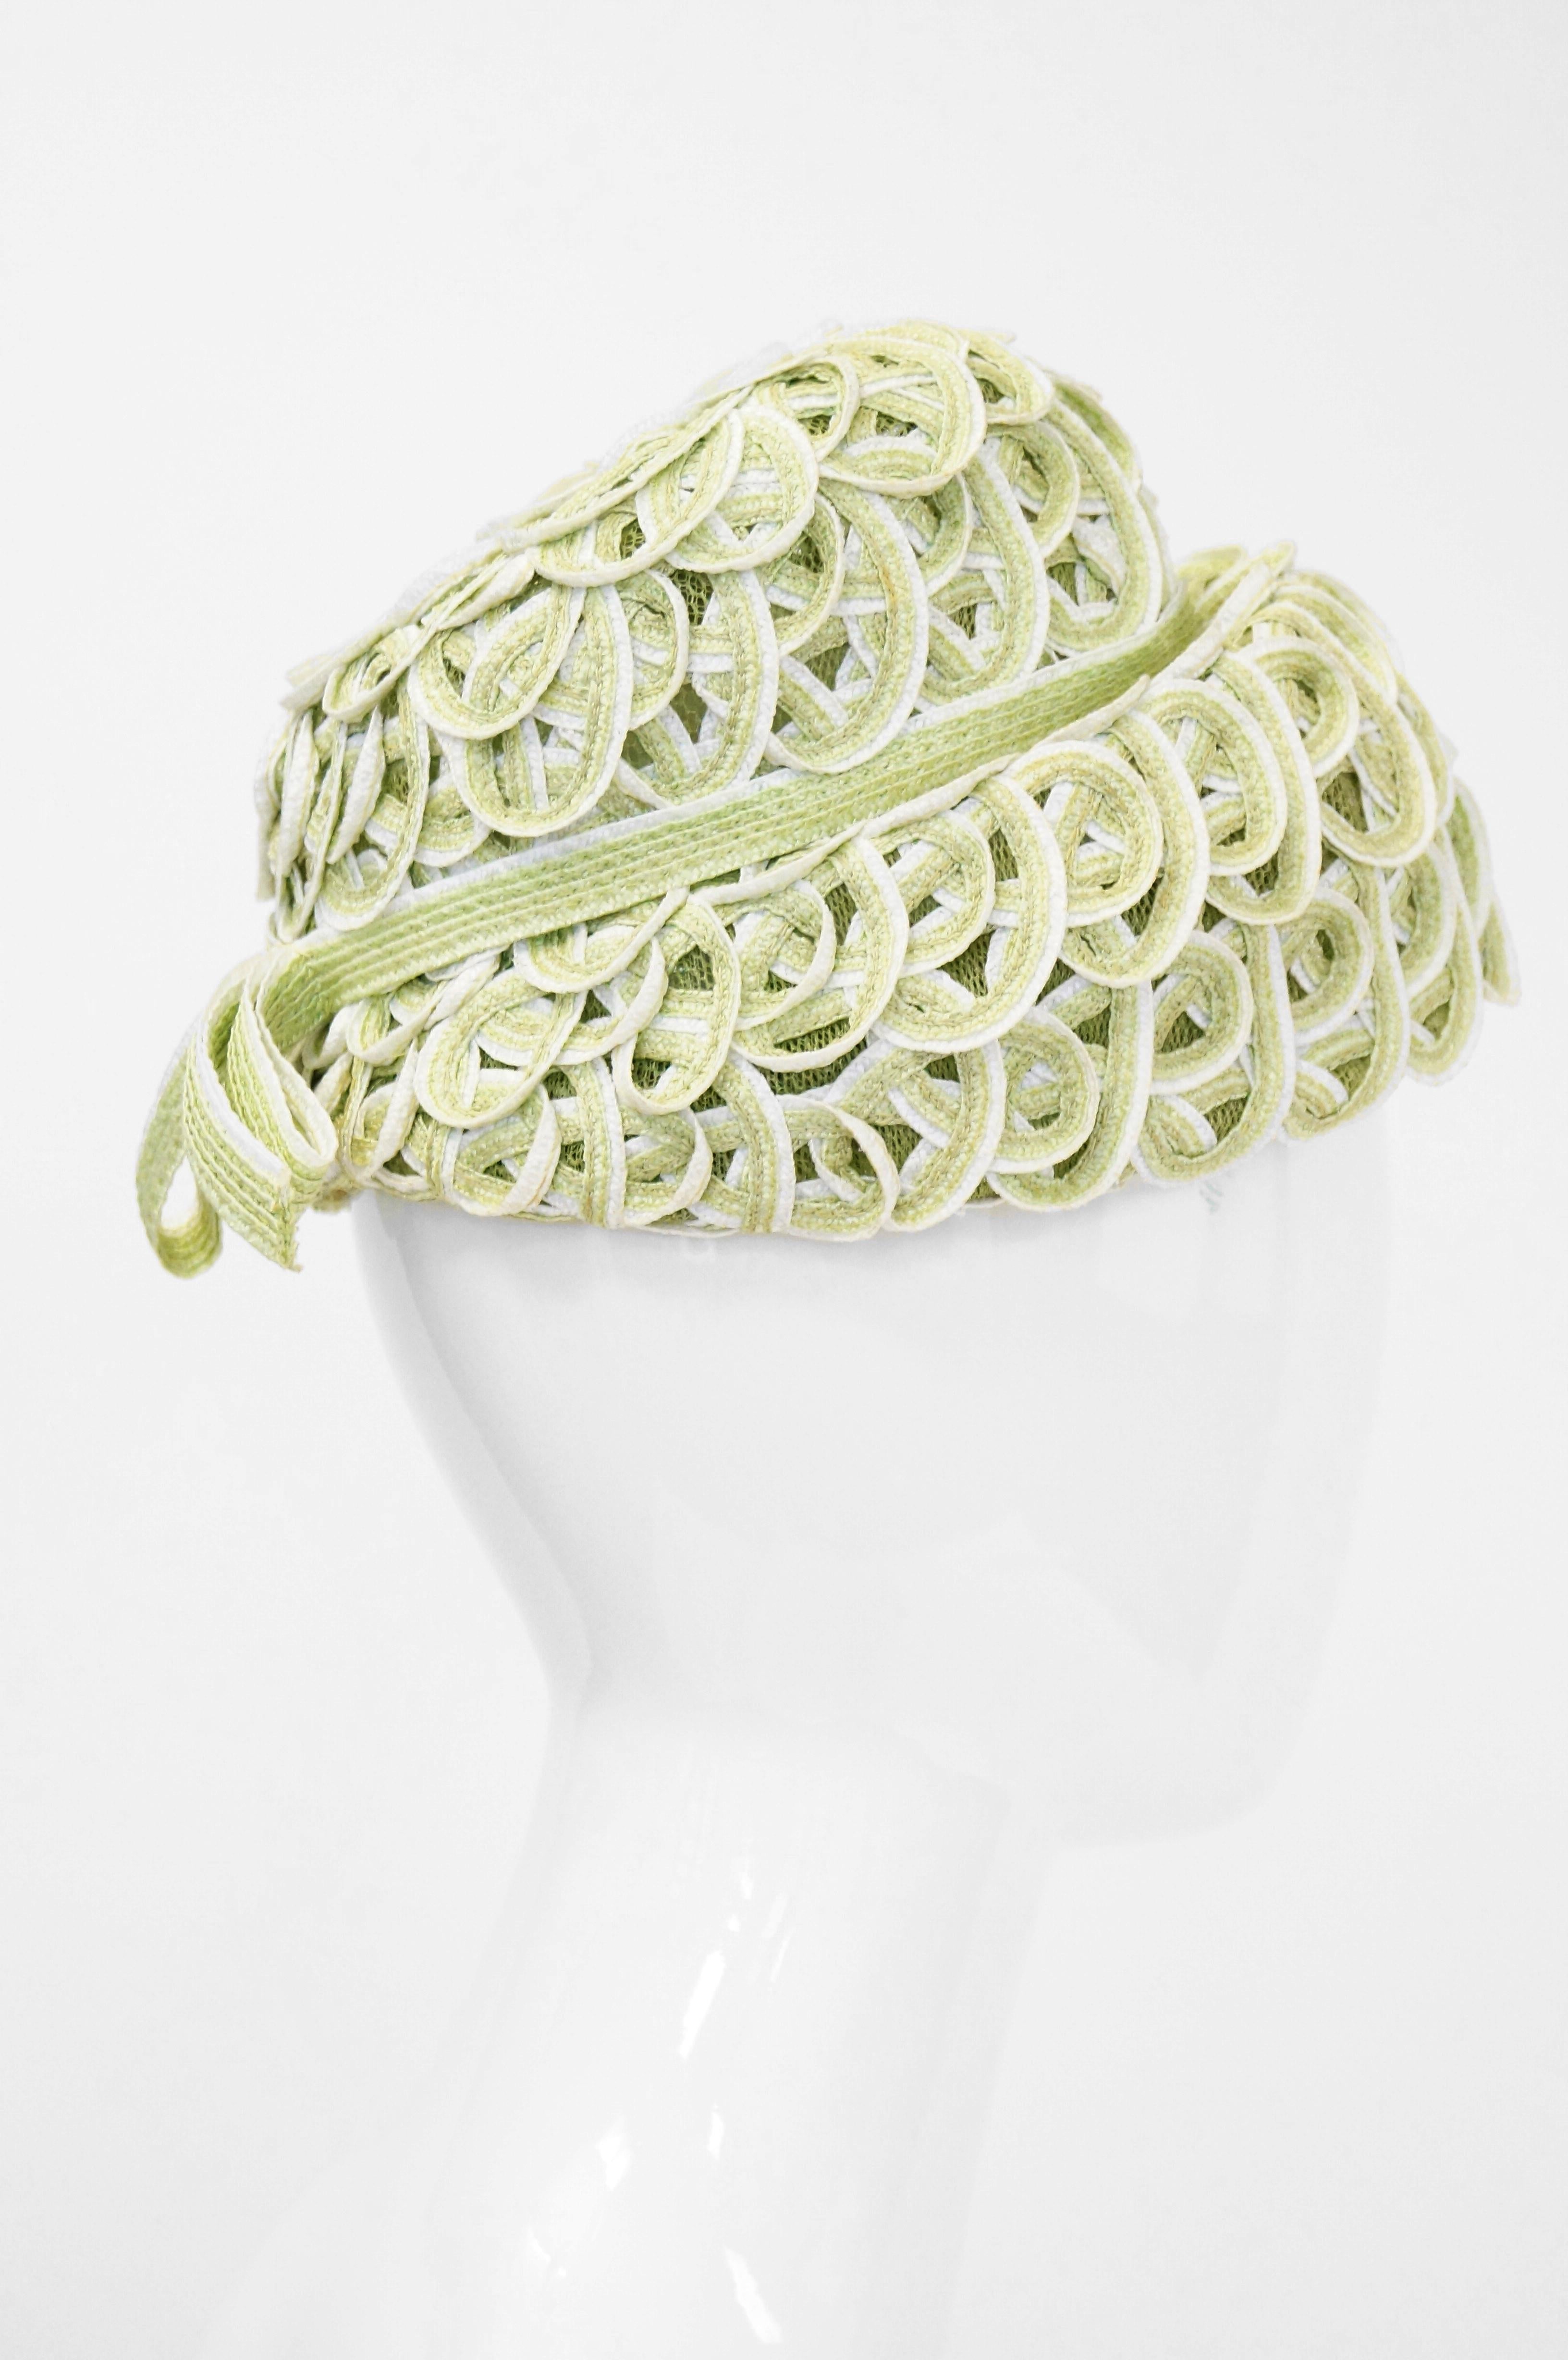 Women's Balenciaga Reproduction Peach Basket Hat in a Subtle Green, 1950s  For Sale